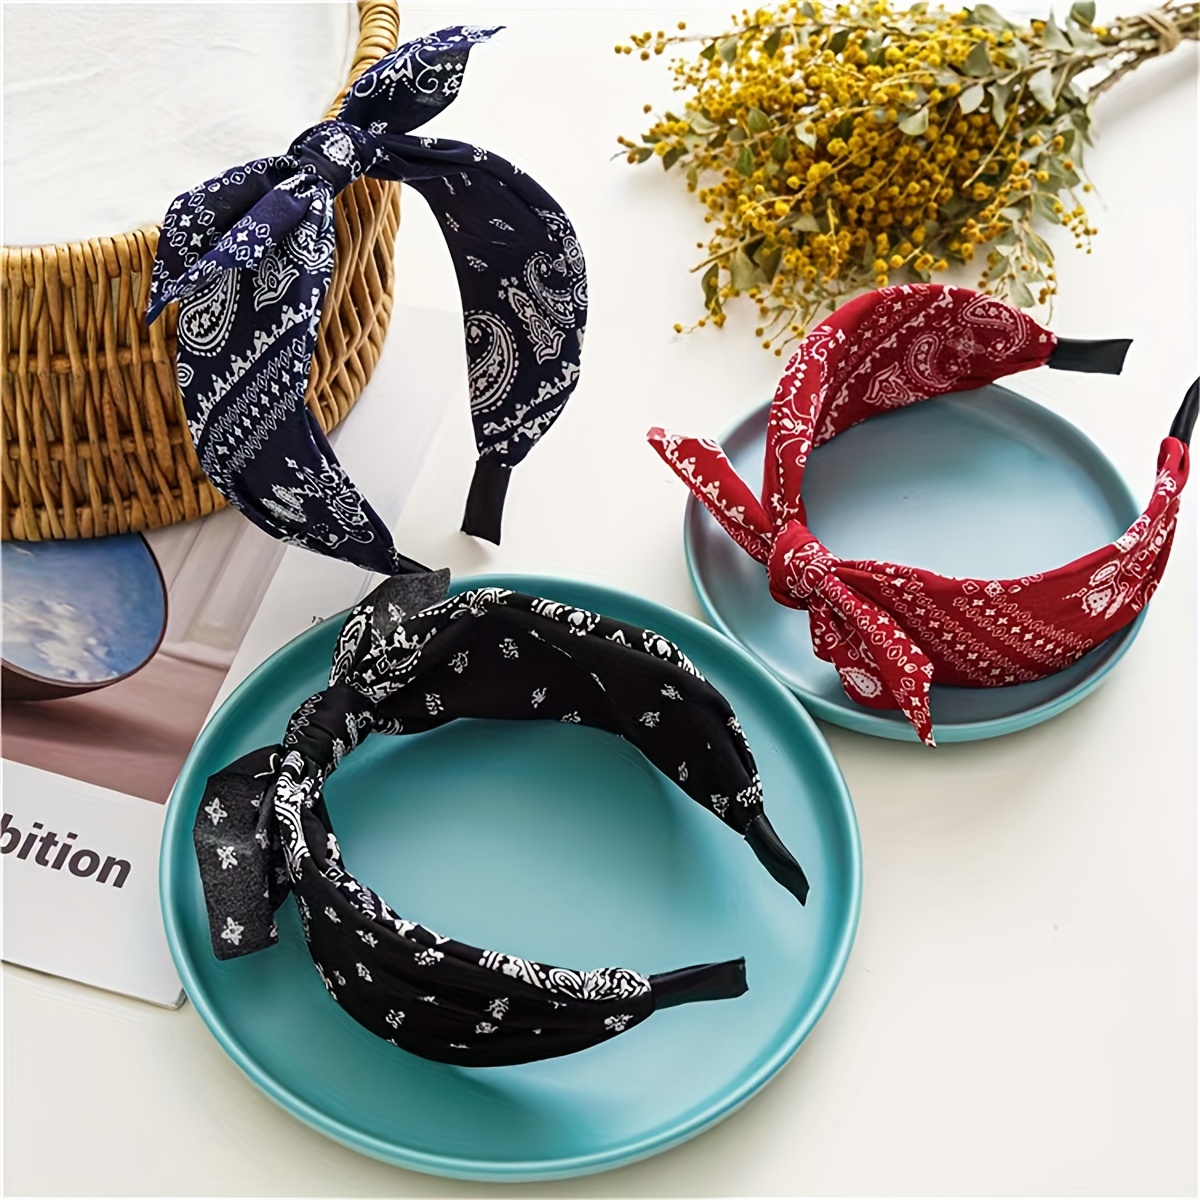 

3 Pcs Women's Fashionable Paisley Printed Fabric Bow Headbands - High Crown, Suitable For Normal Hair Types, Knitted Material